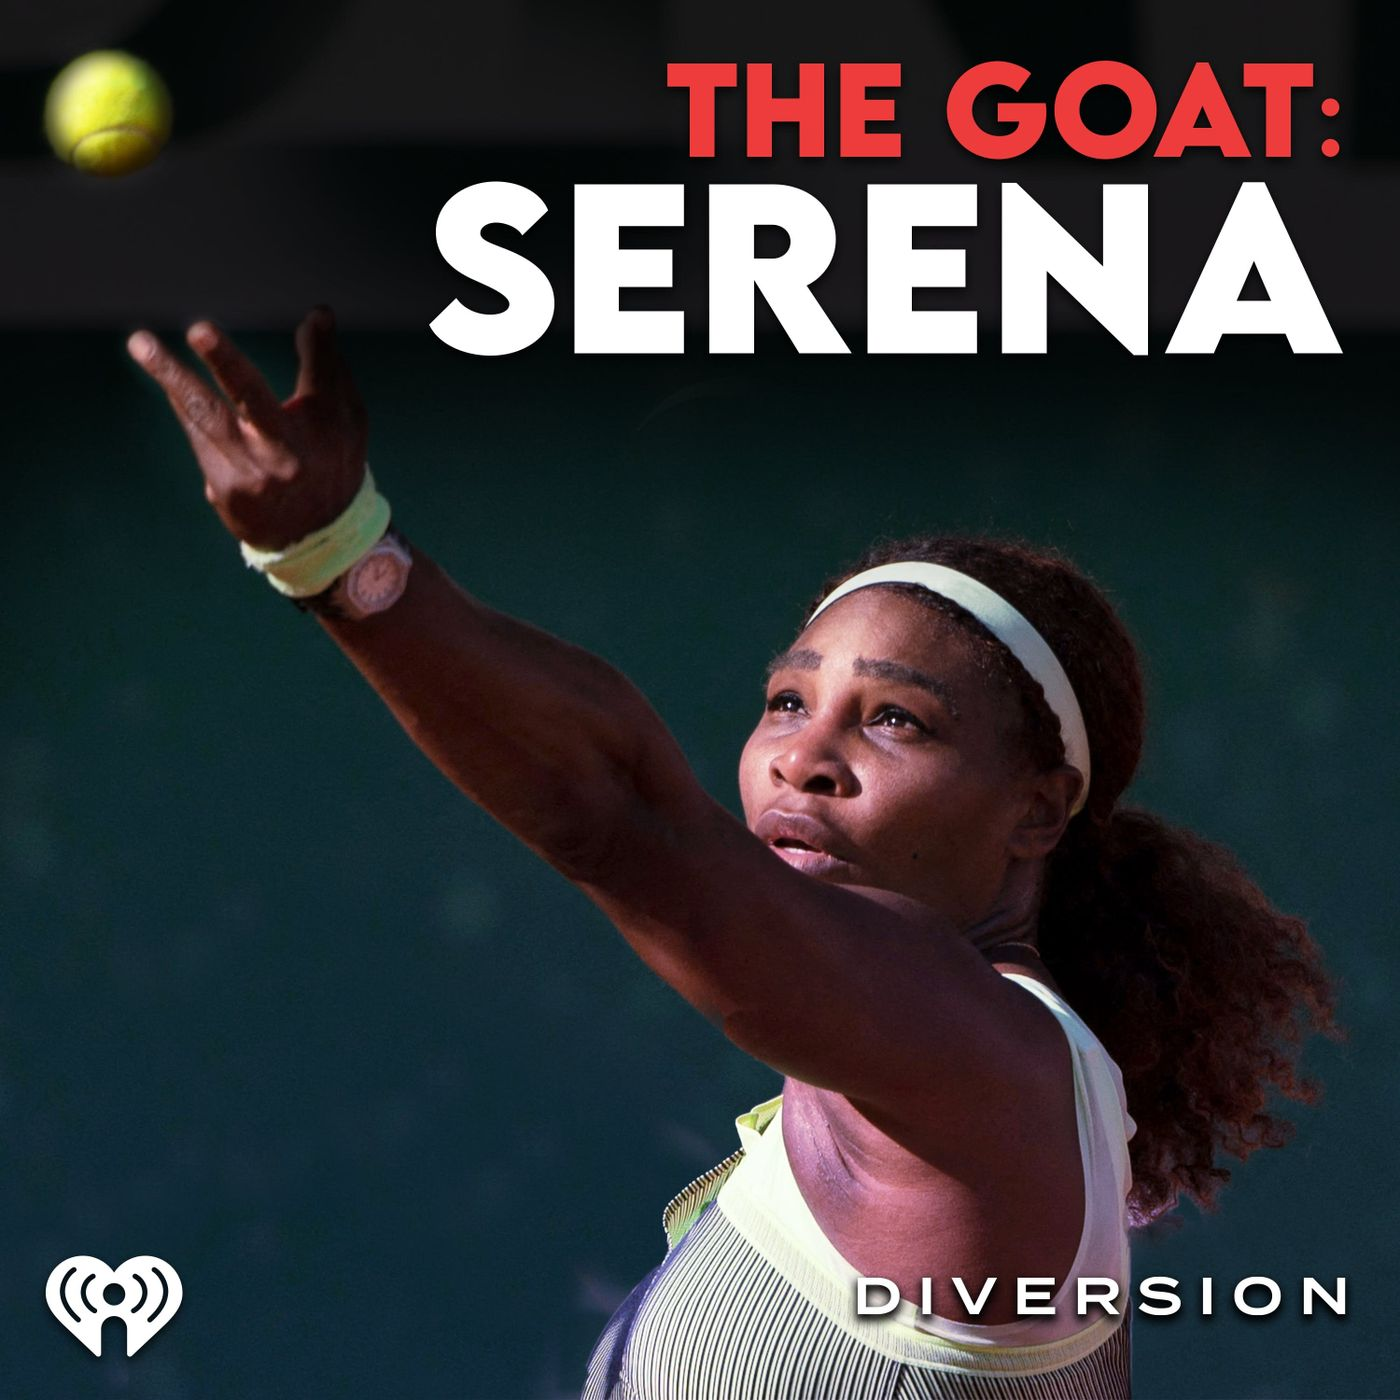 The Making of The GOAT:  Serena